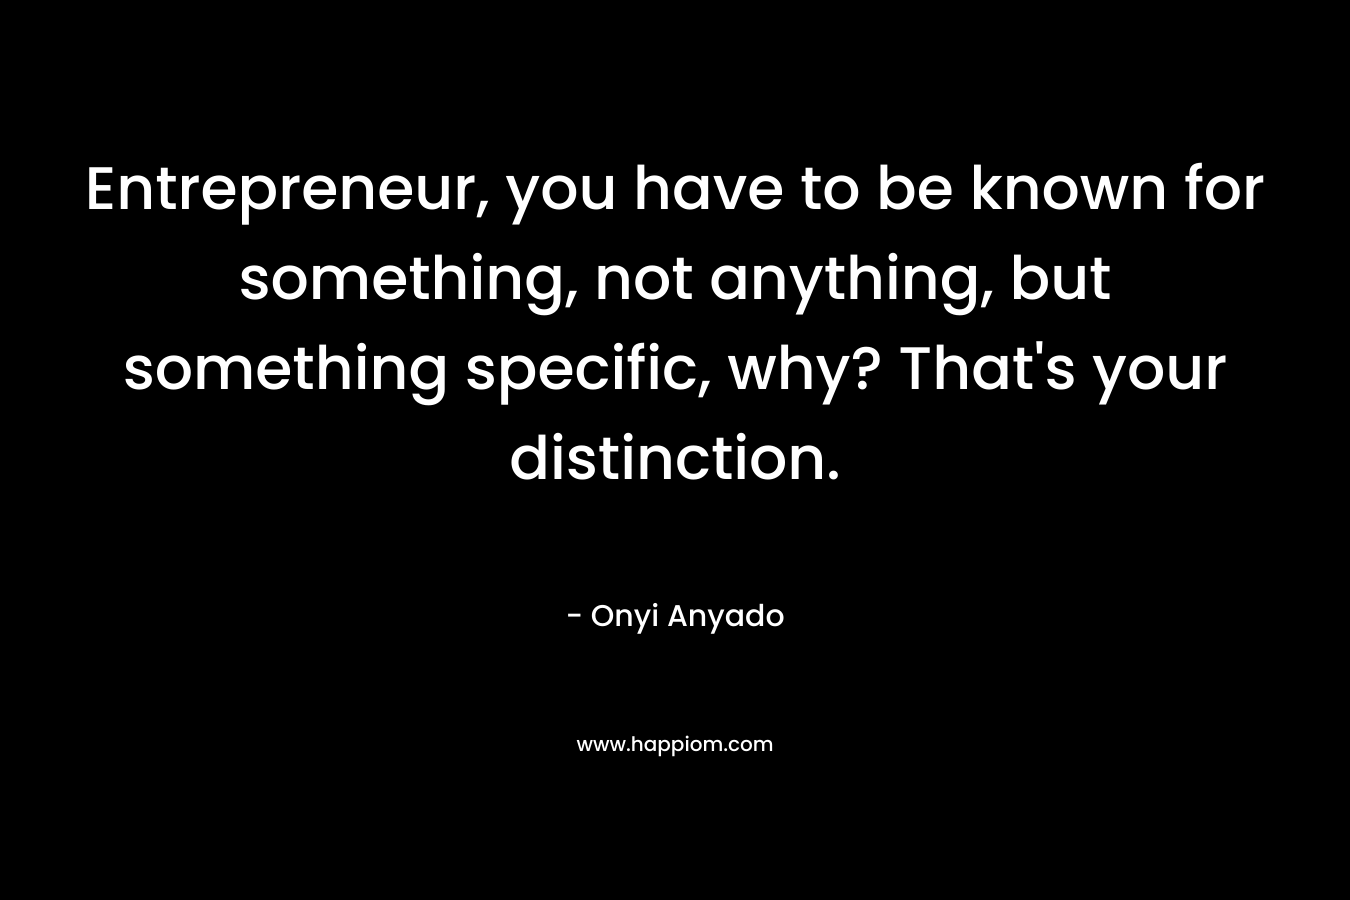 Entrepreneur, you have to be known for something, not anything, but something specific, why? That’s your distinction. – Onyi Anyado